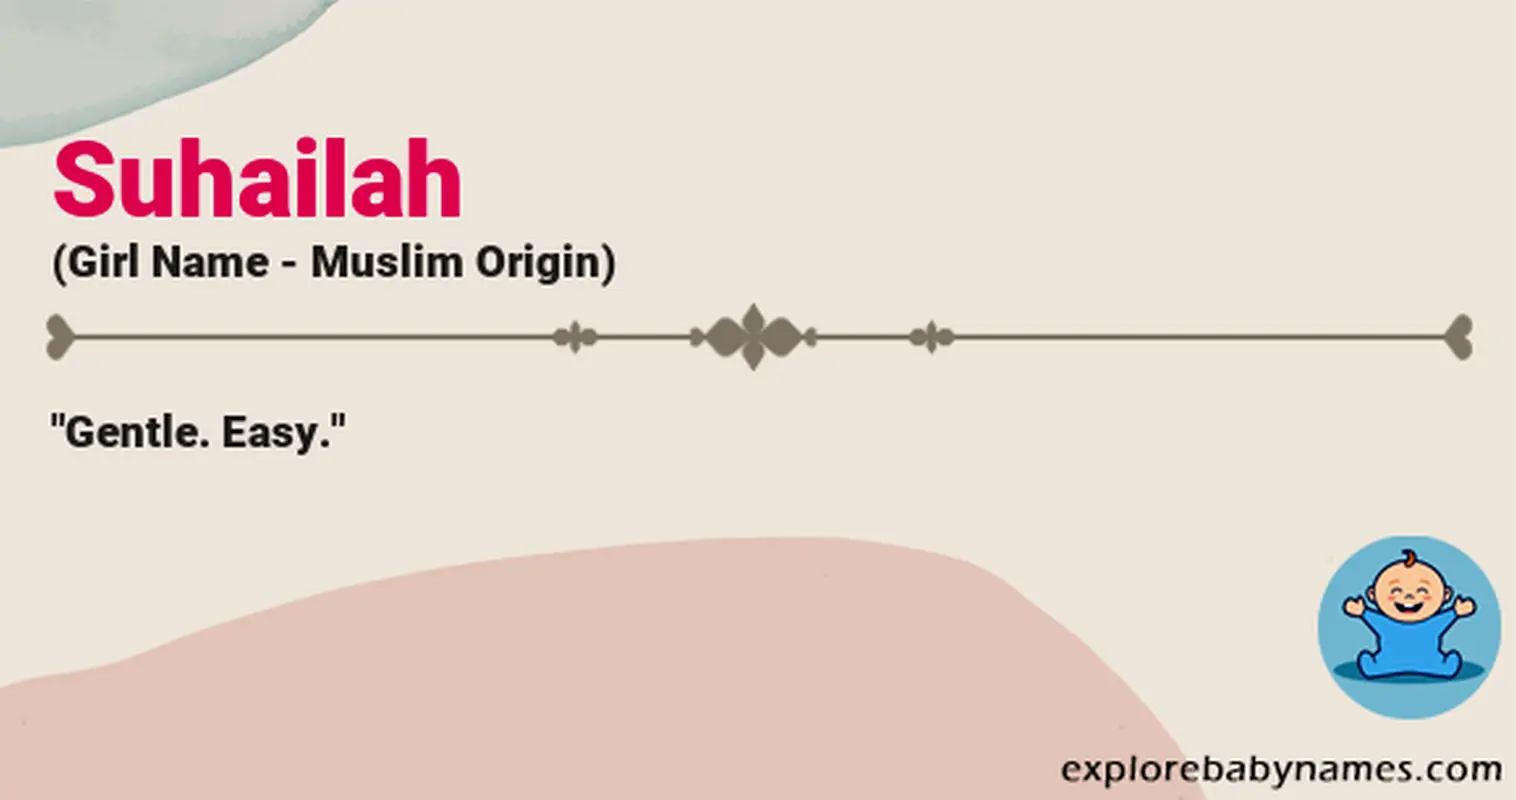 Meaning of Suhailah